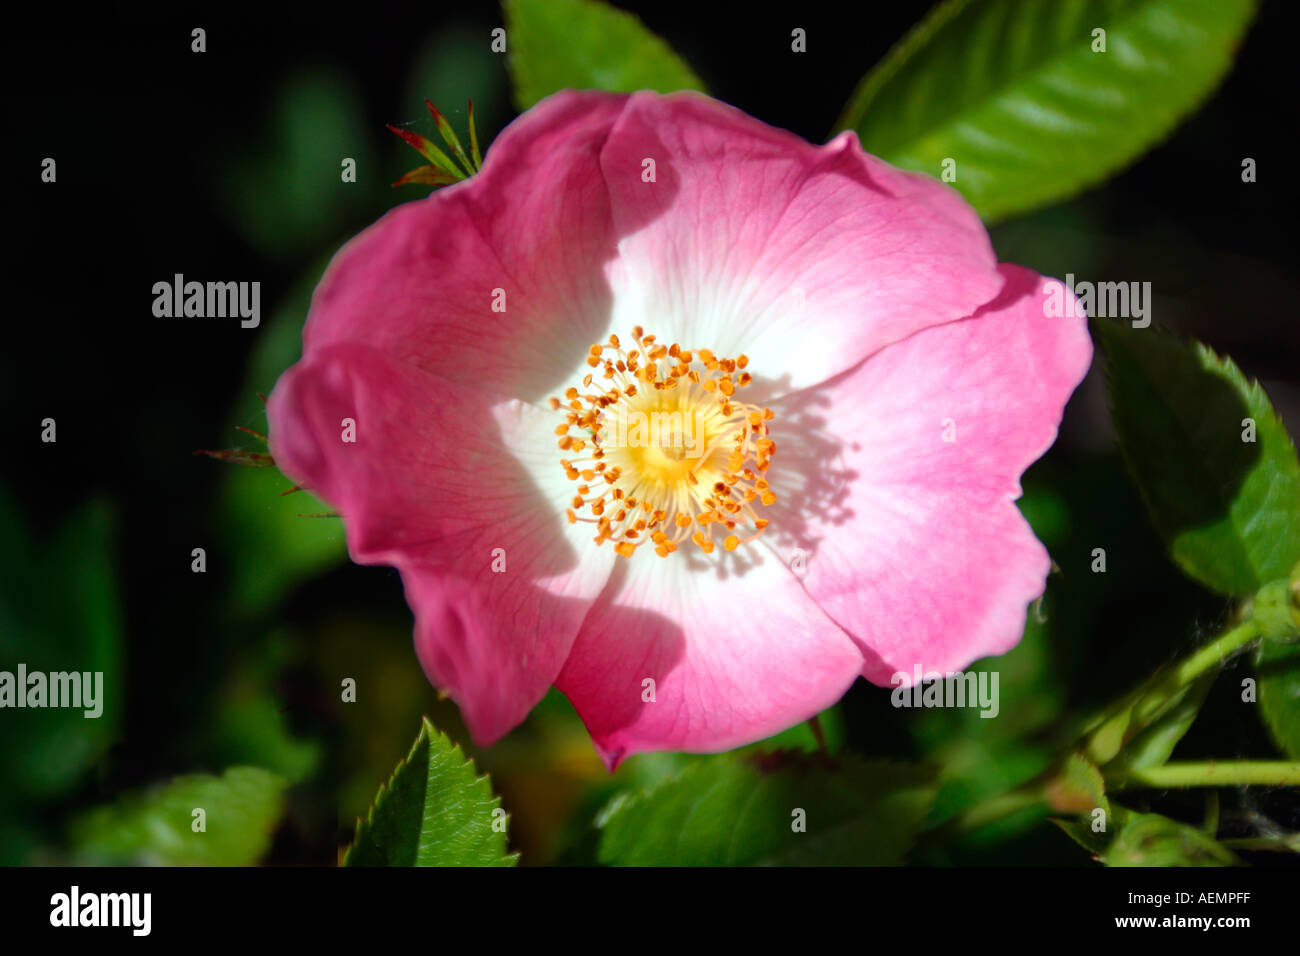 Rosa Beautiful Britain High Resolution Stock Photography and Images - Alamy